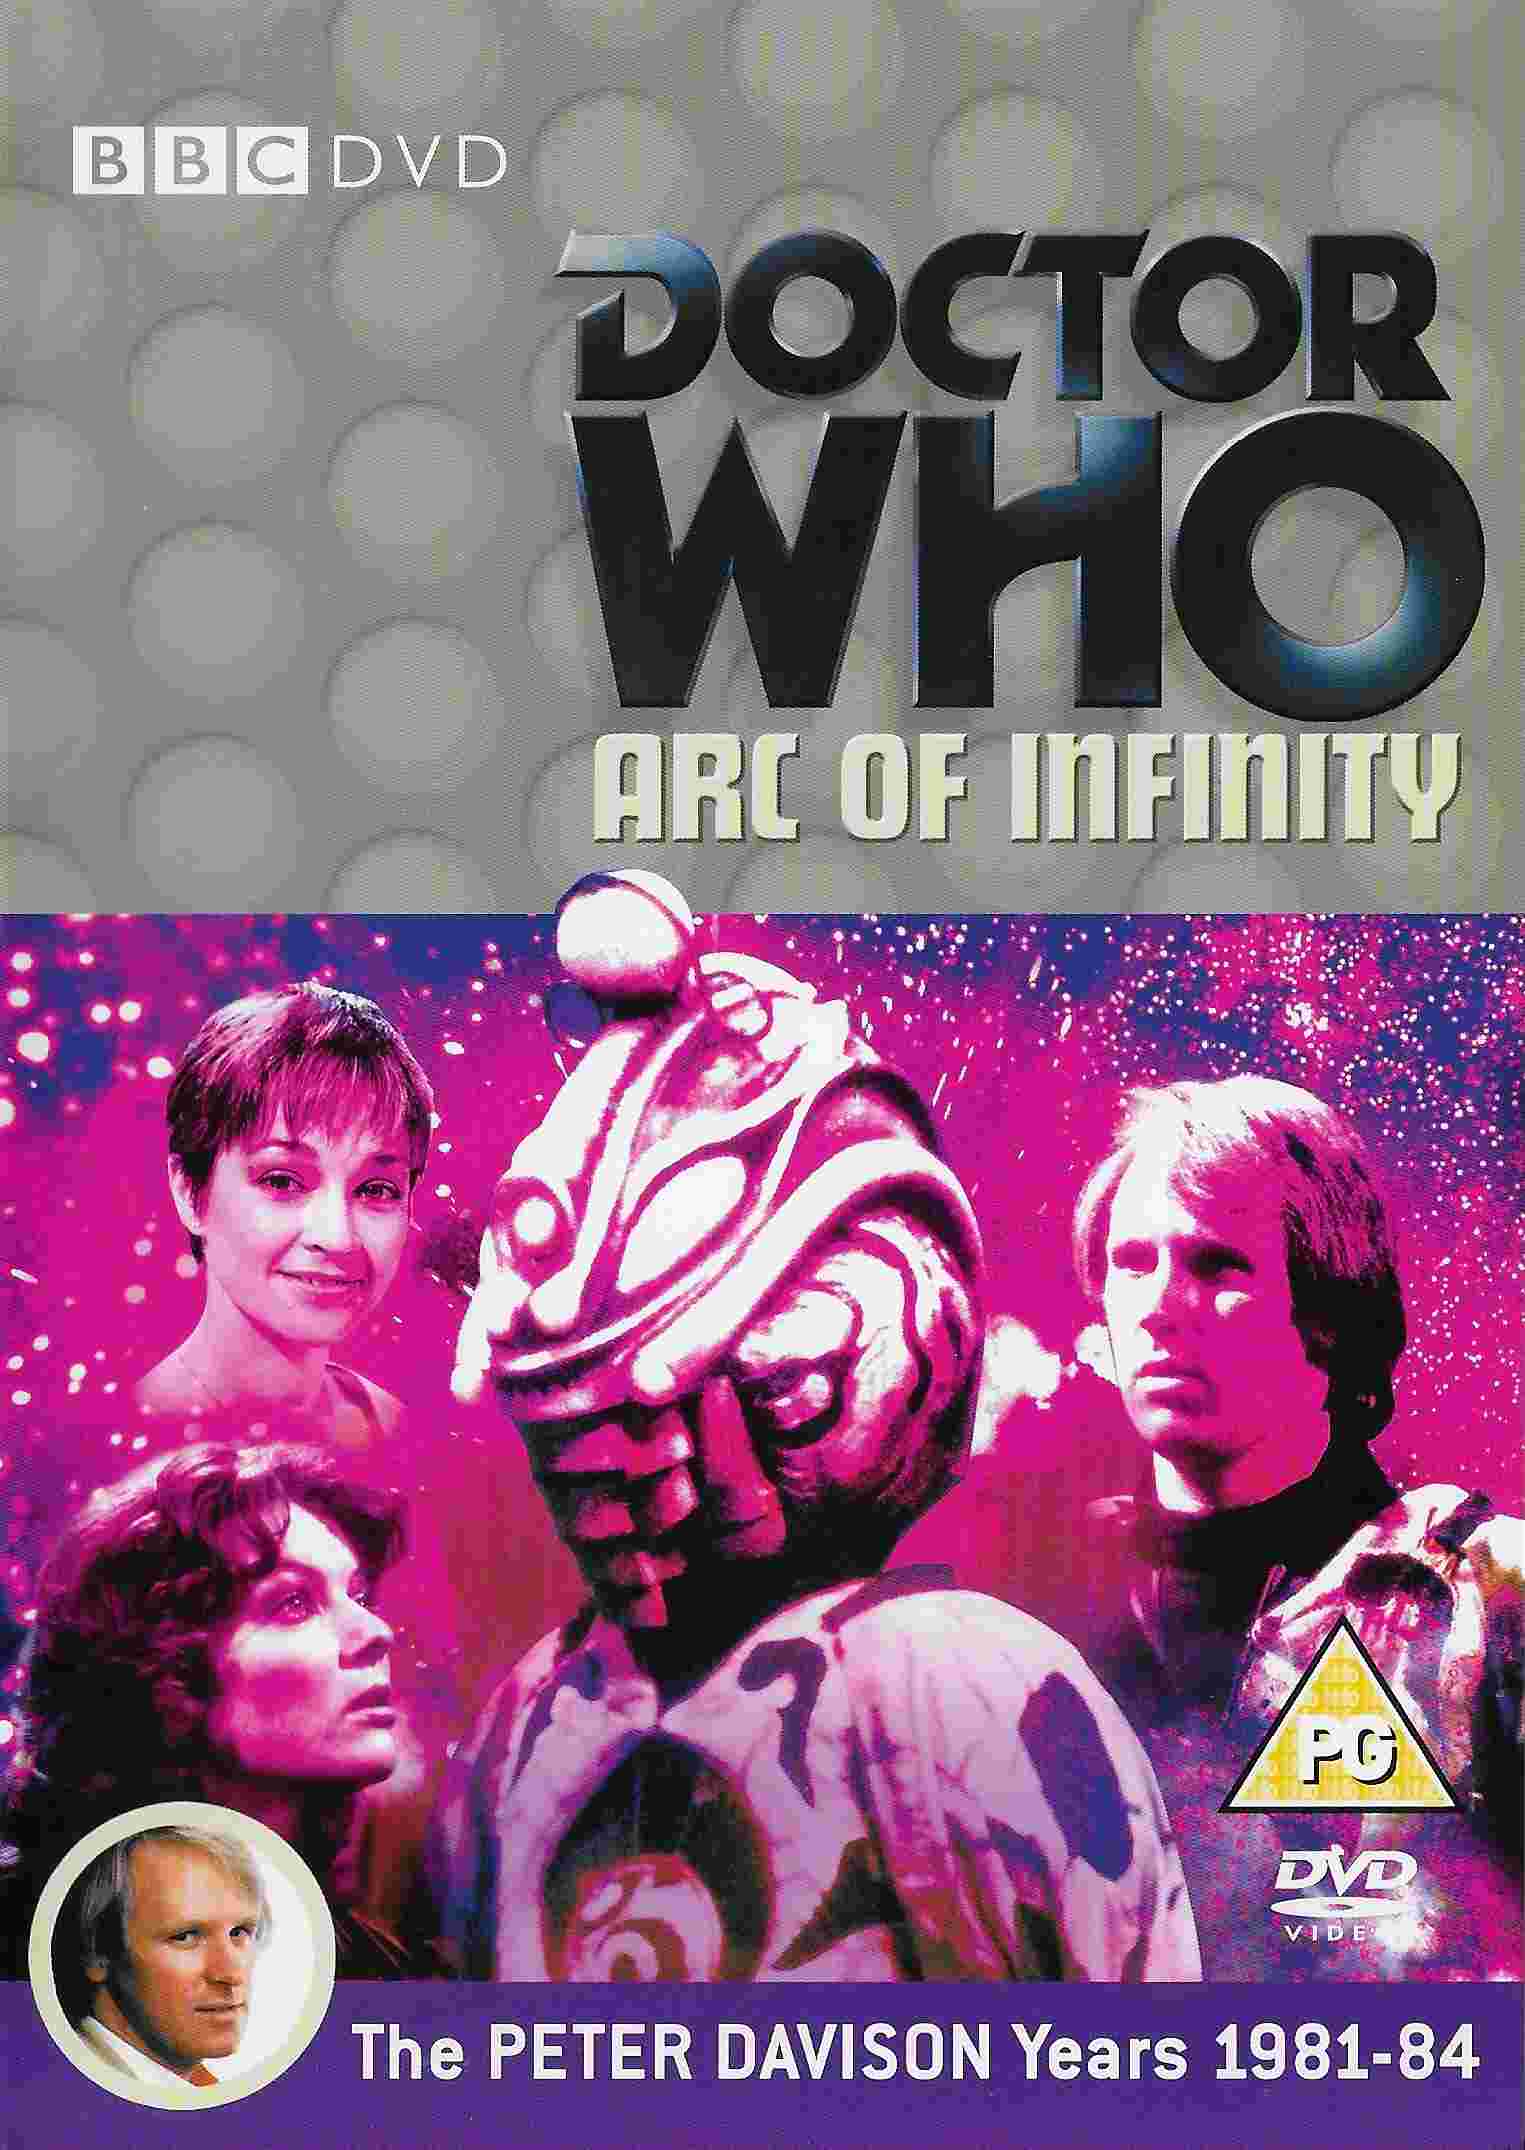 Picture of BBCDVD 2327B Doctor Who - Arc of infinity by artist Johnny Byrne from the BBC records and Tapes library